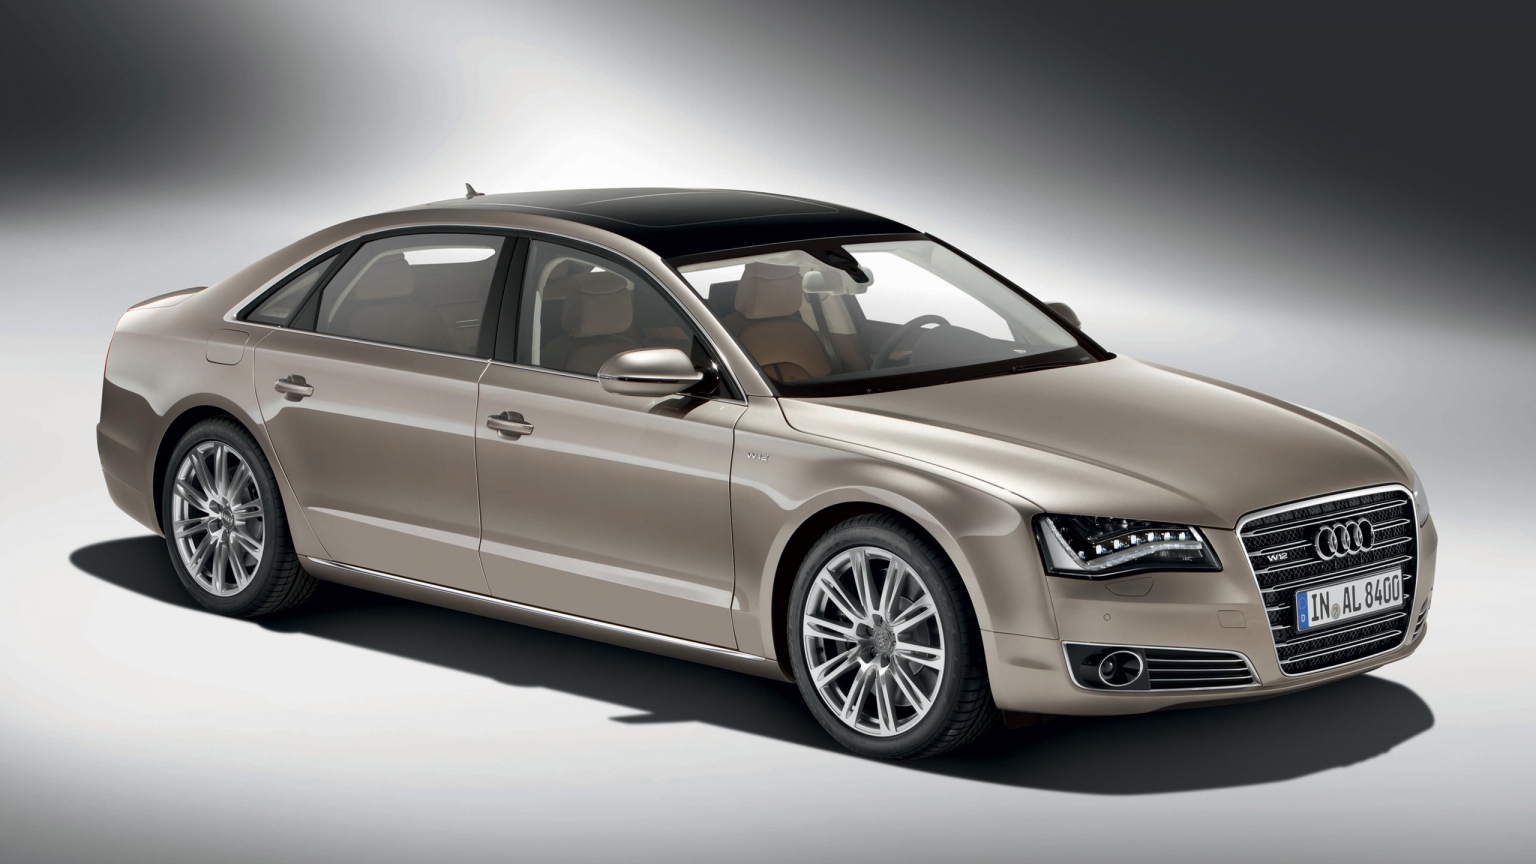 Audi A8 W12 2011 for 1536 x 864 HDTV resolution